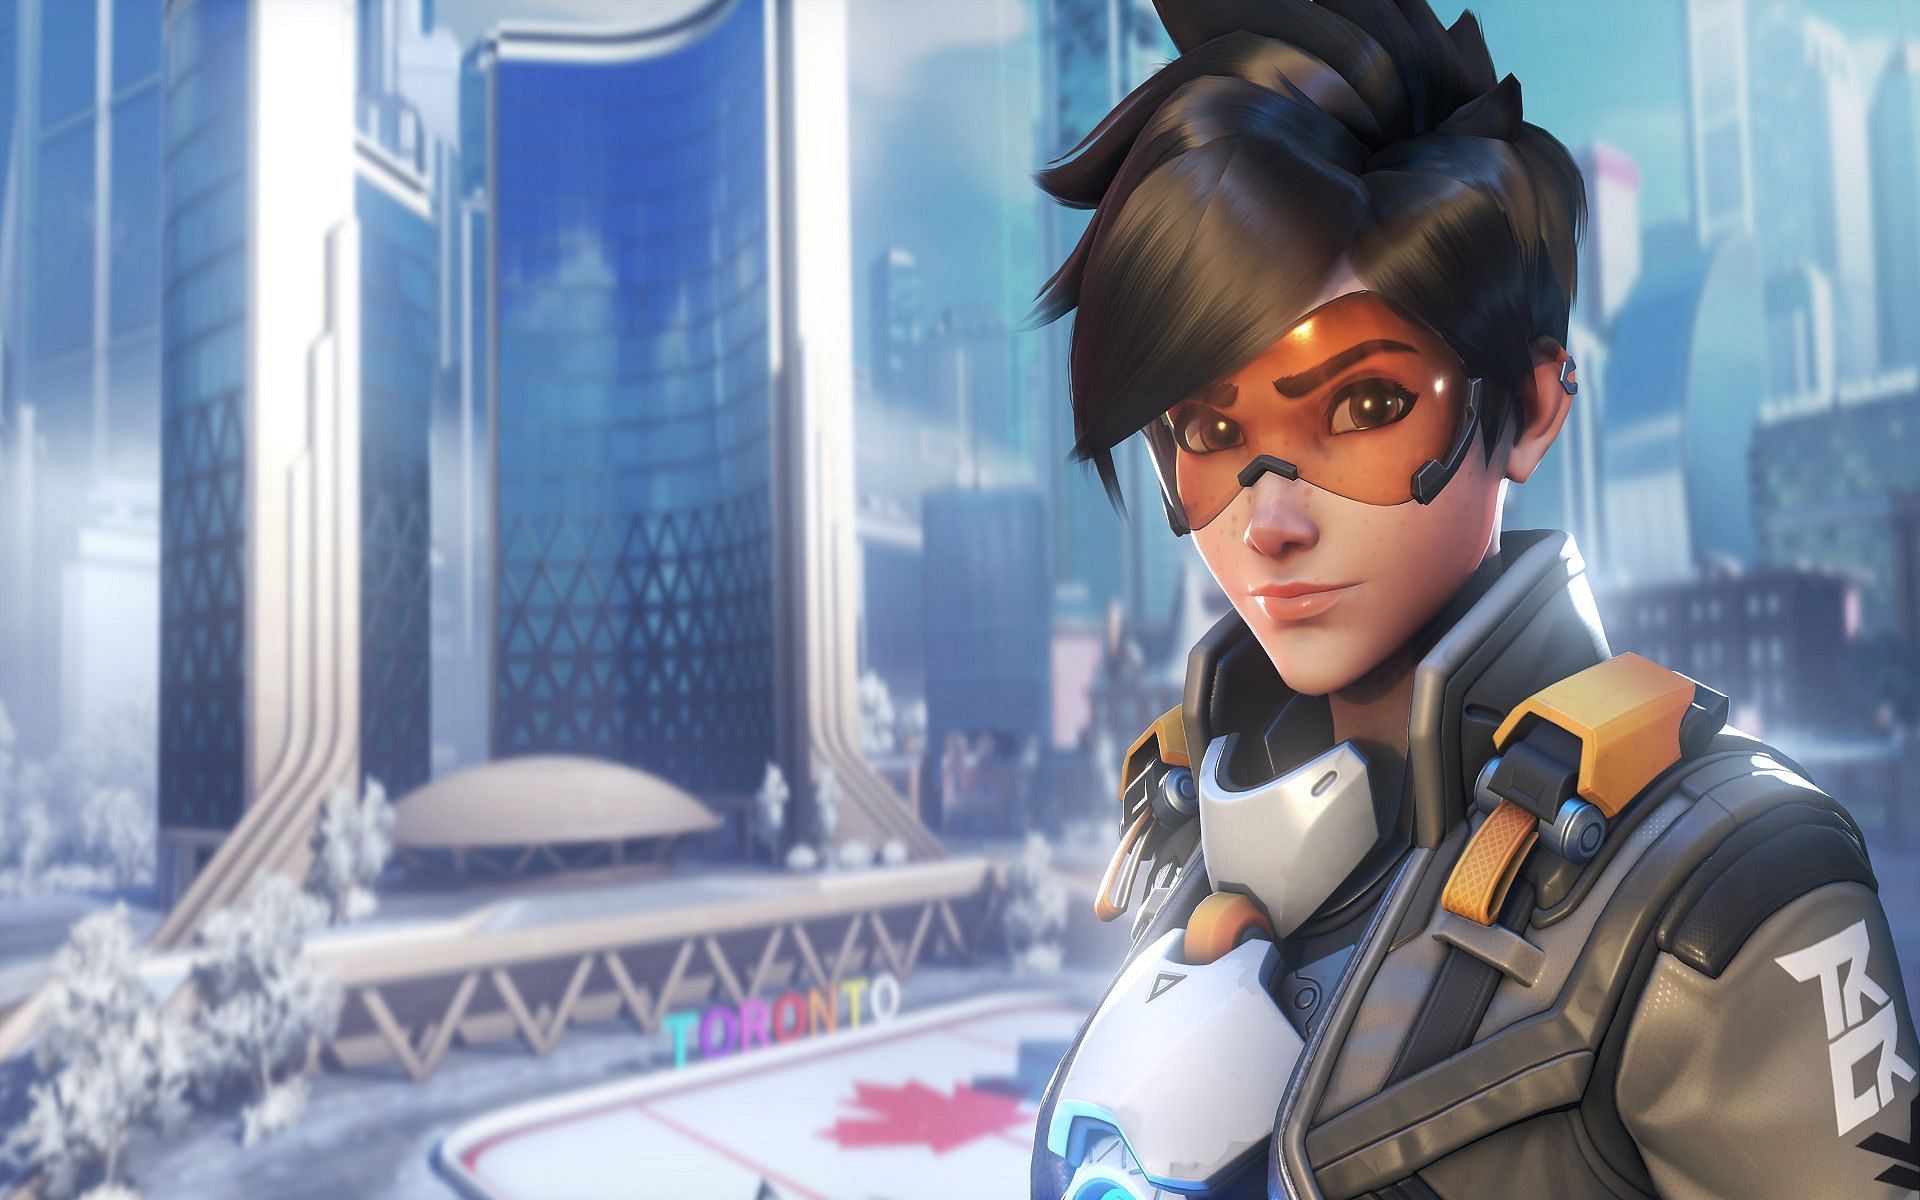 Tracer returns to Overwatch 2 (Image via Blizzard Entertainment)